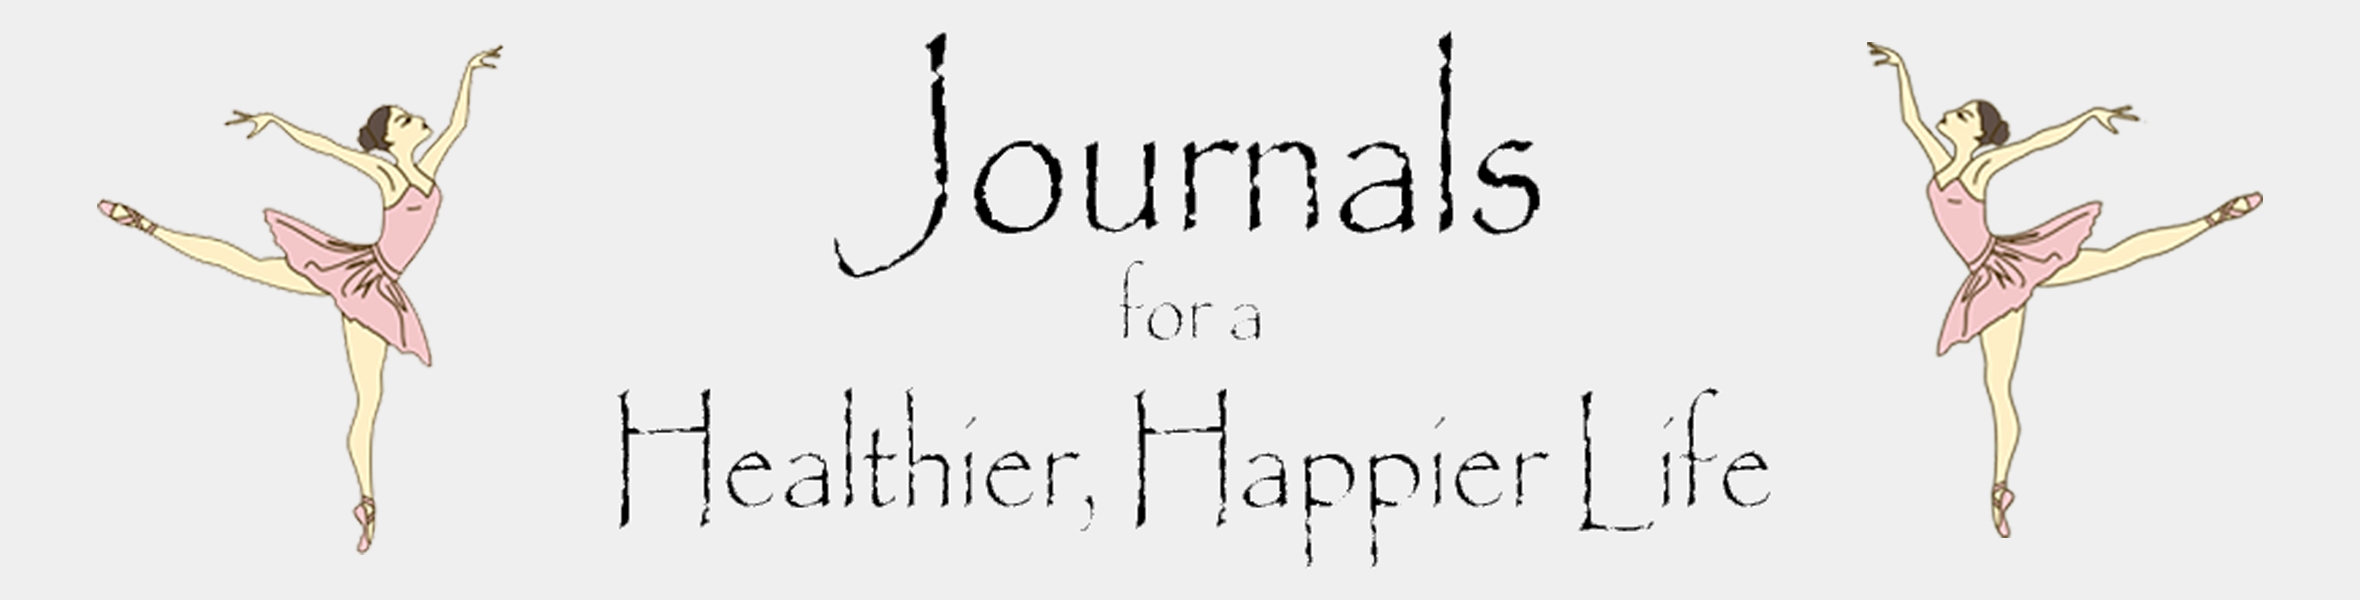 Journals for a Healthier, Happier Life image with two ballerinas